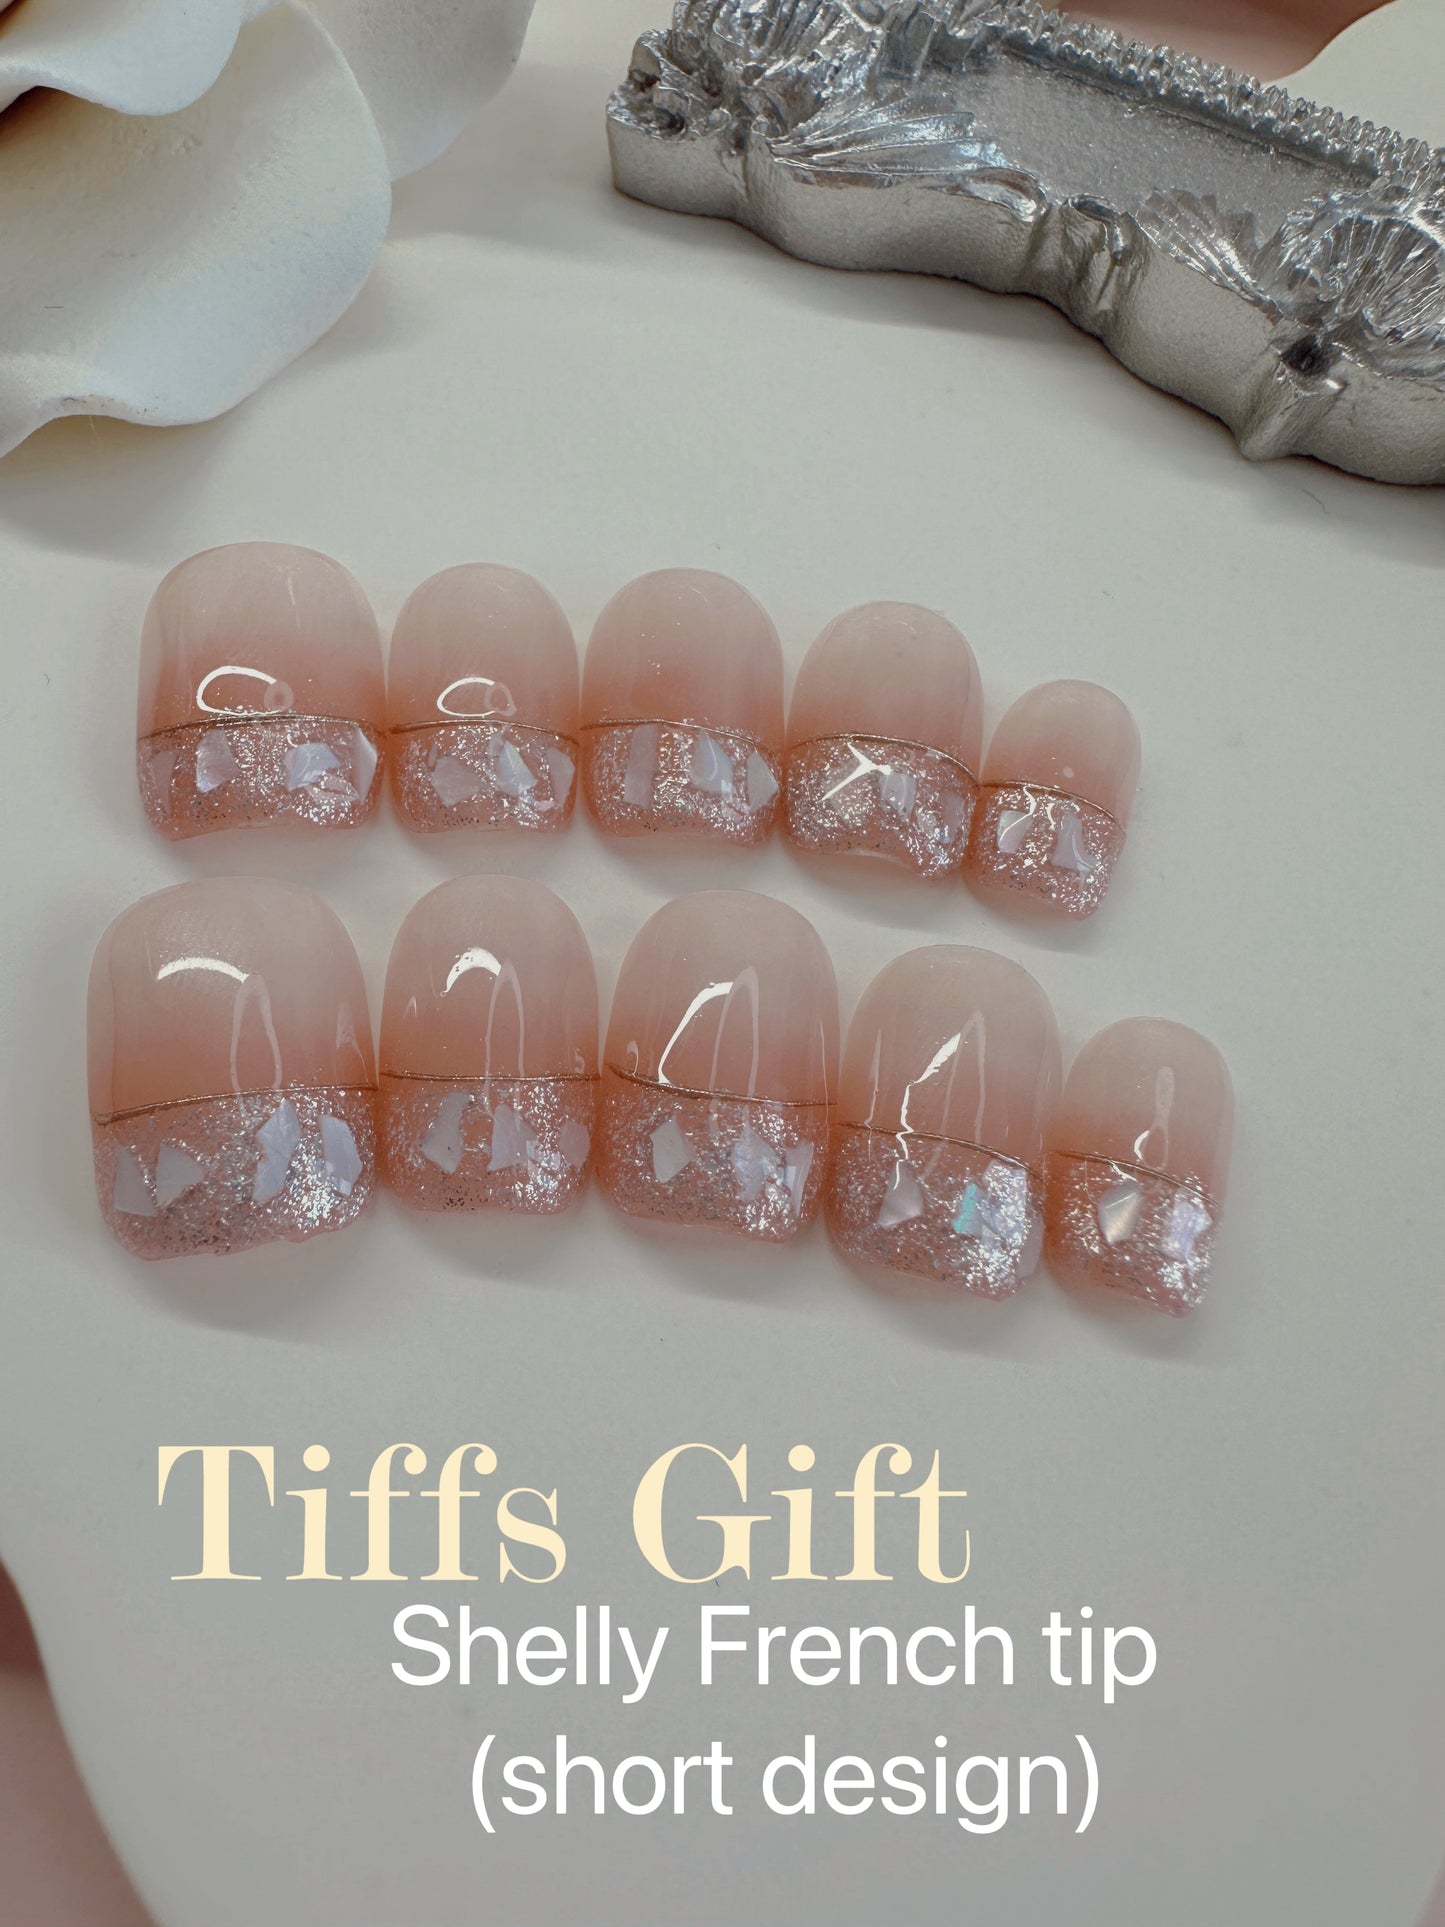 Shelly French tip (short length) Reusable Hand Made Press On Nails - TiffsGift